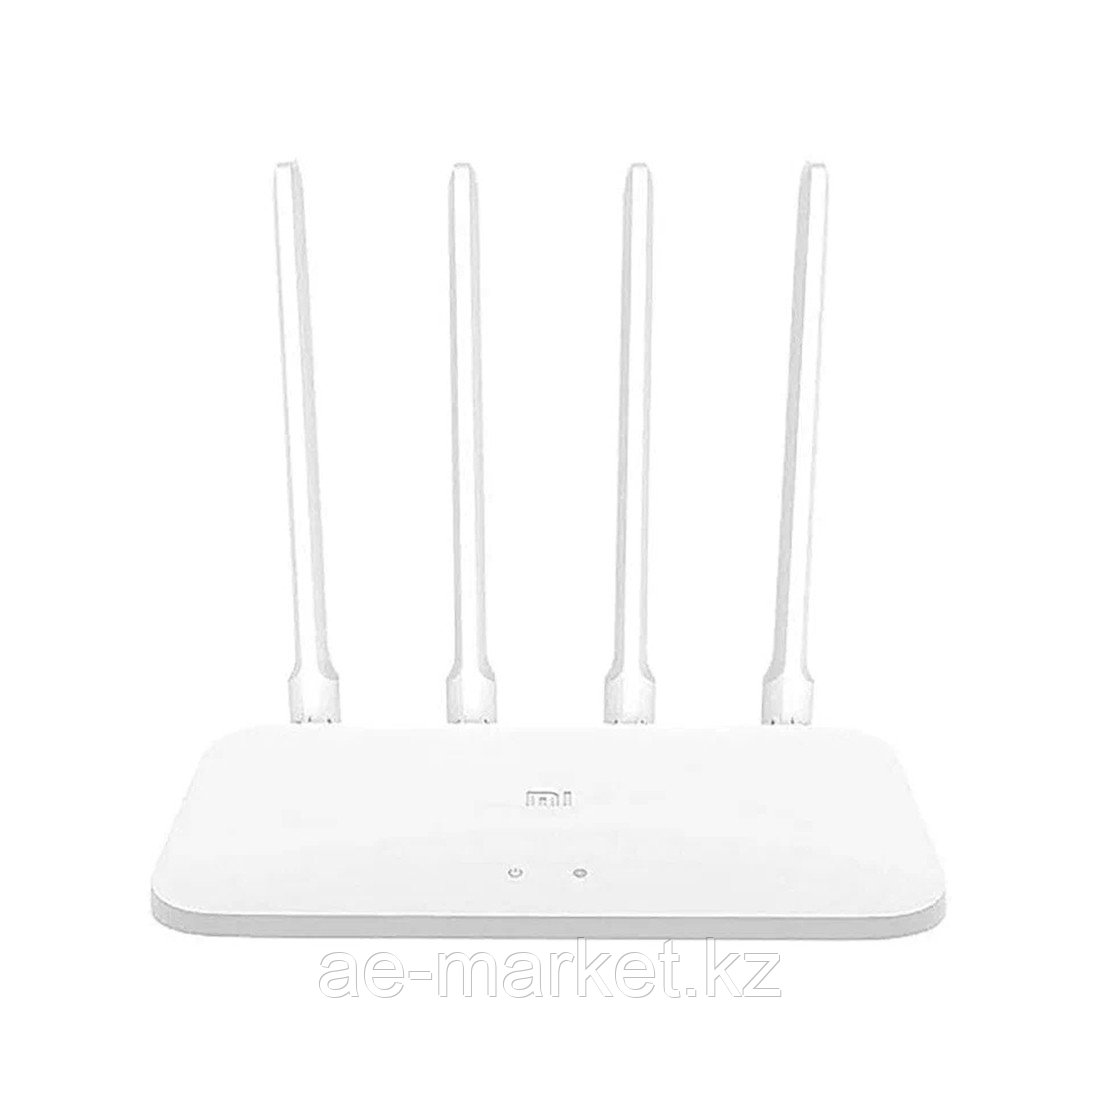 Маршрутизатор Xiaomi Router AC1200 - фото 2 - id-p110550554